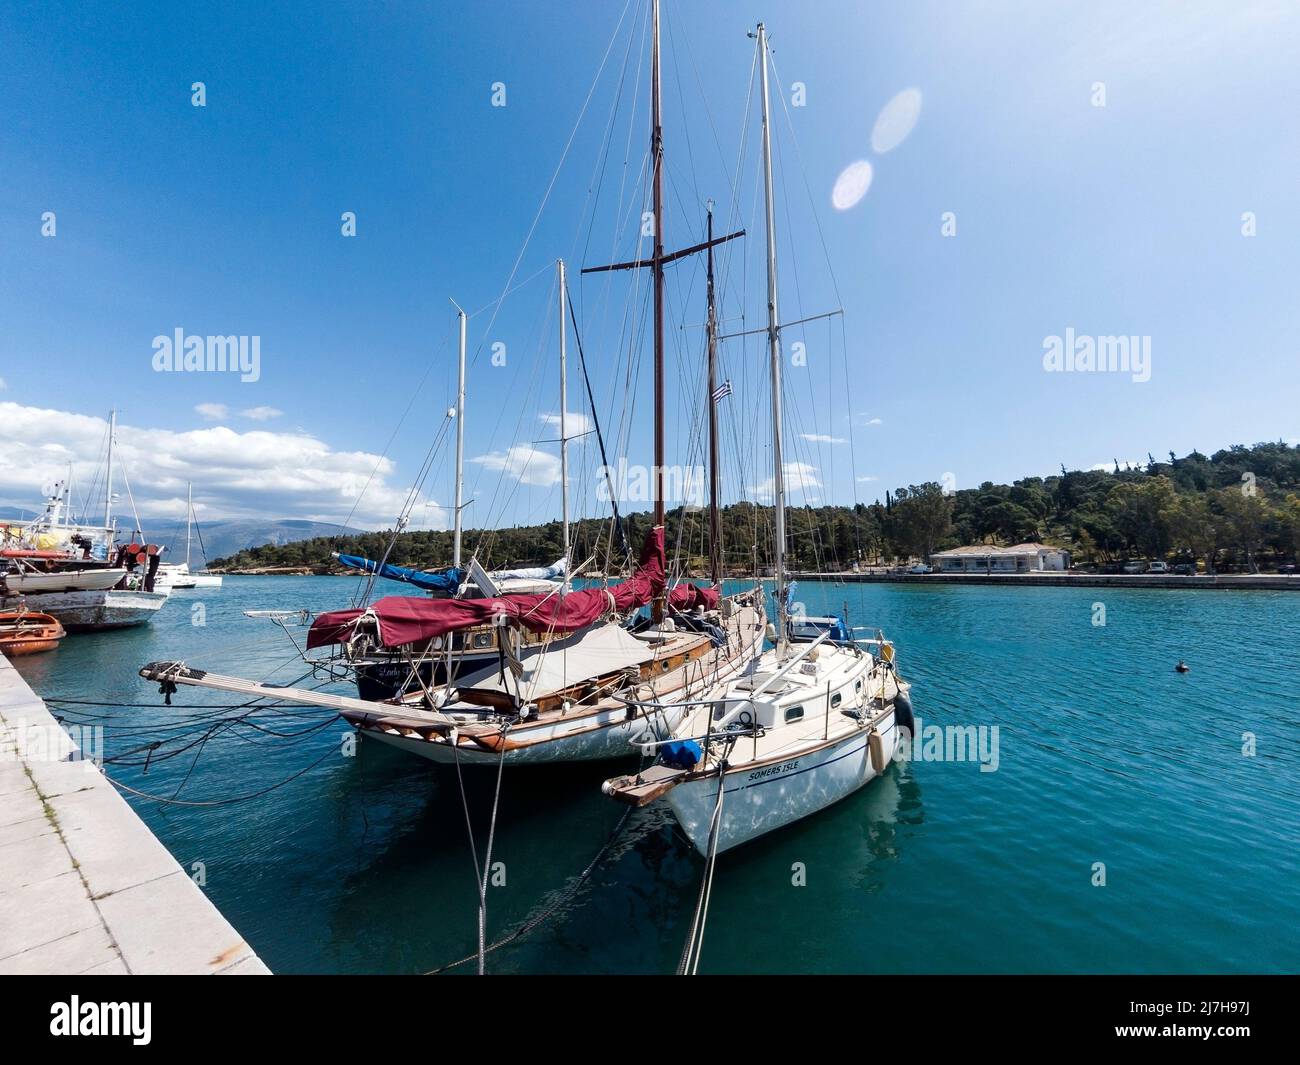 Private cruising yachts anchored in the small port of Galaxidi, a picturesque town of great naval tradition in central Greece, Europe. Stock Photo